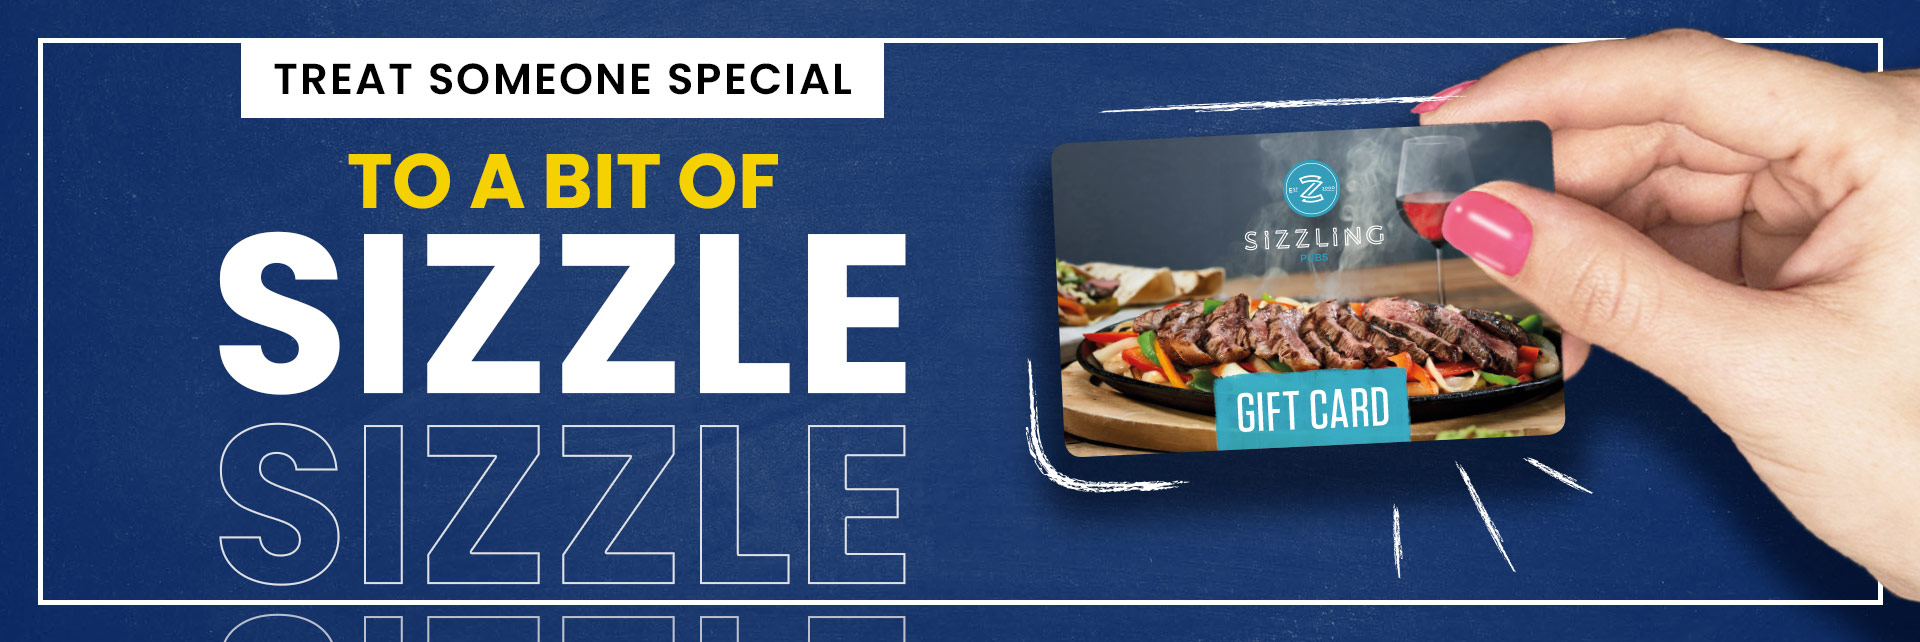 Sizzling Pubs Gift Card at Travellers Inn in Sheffield